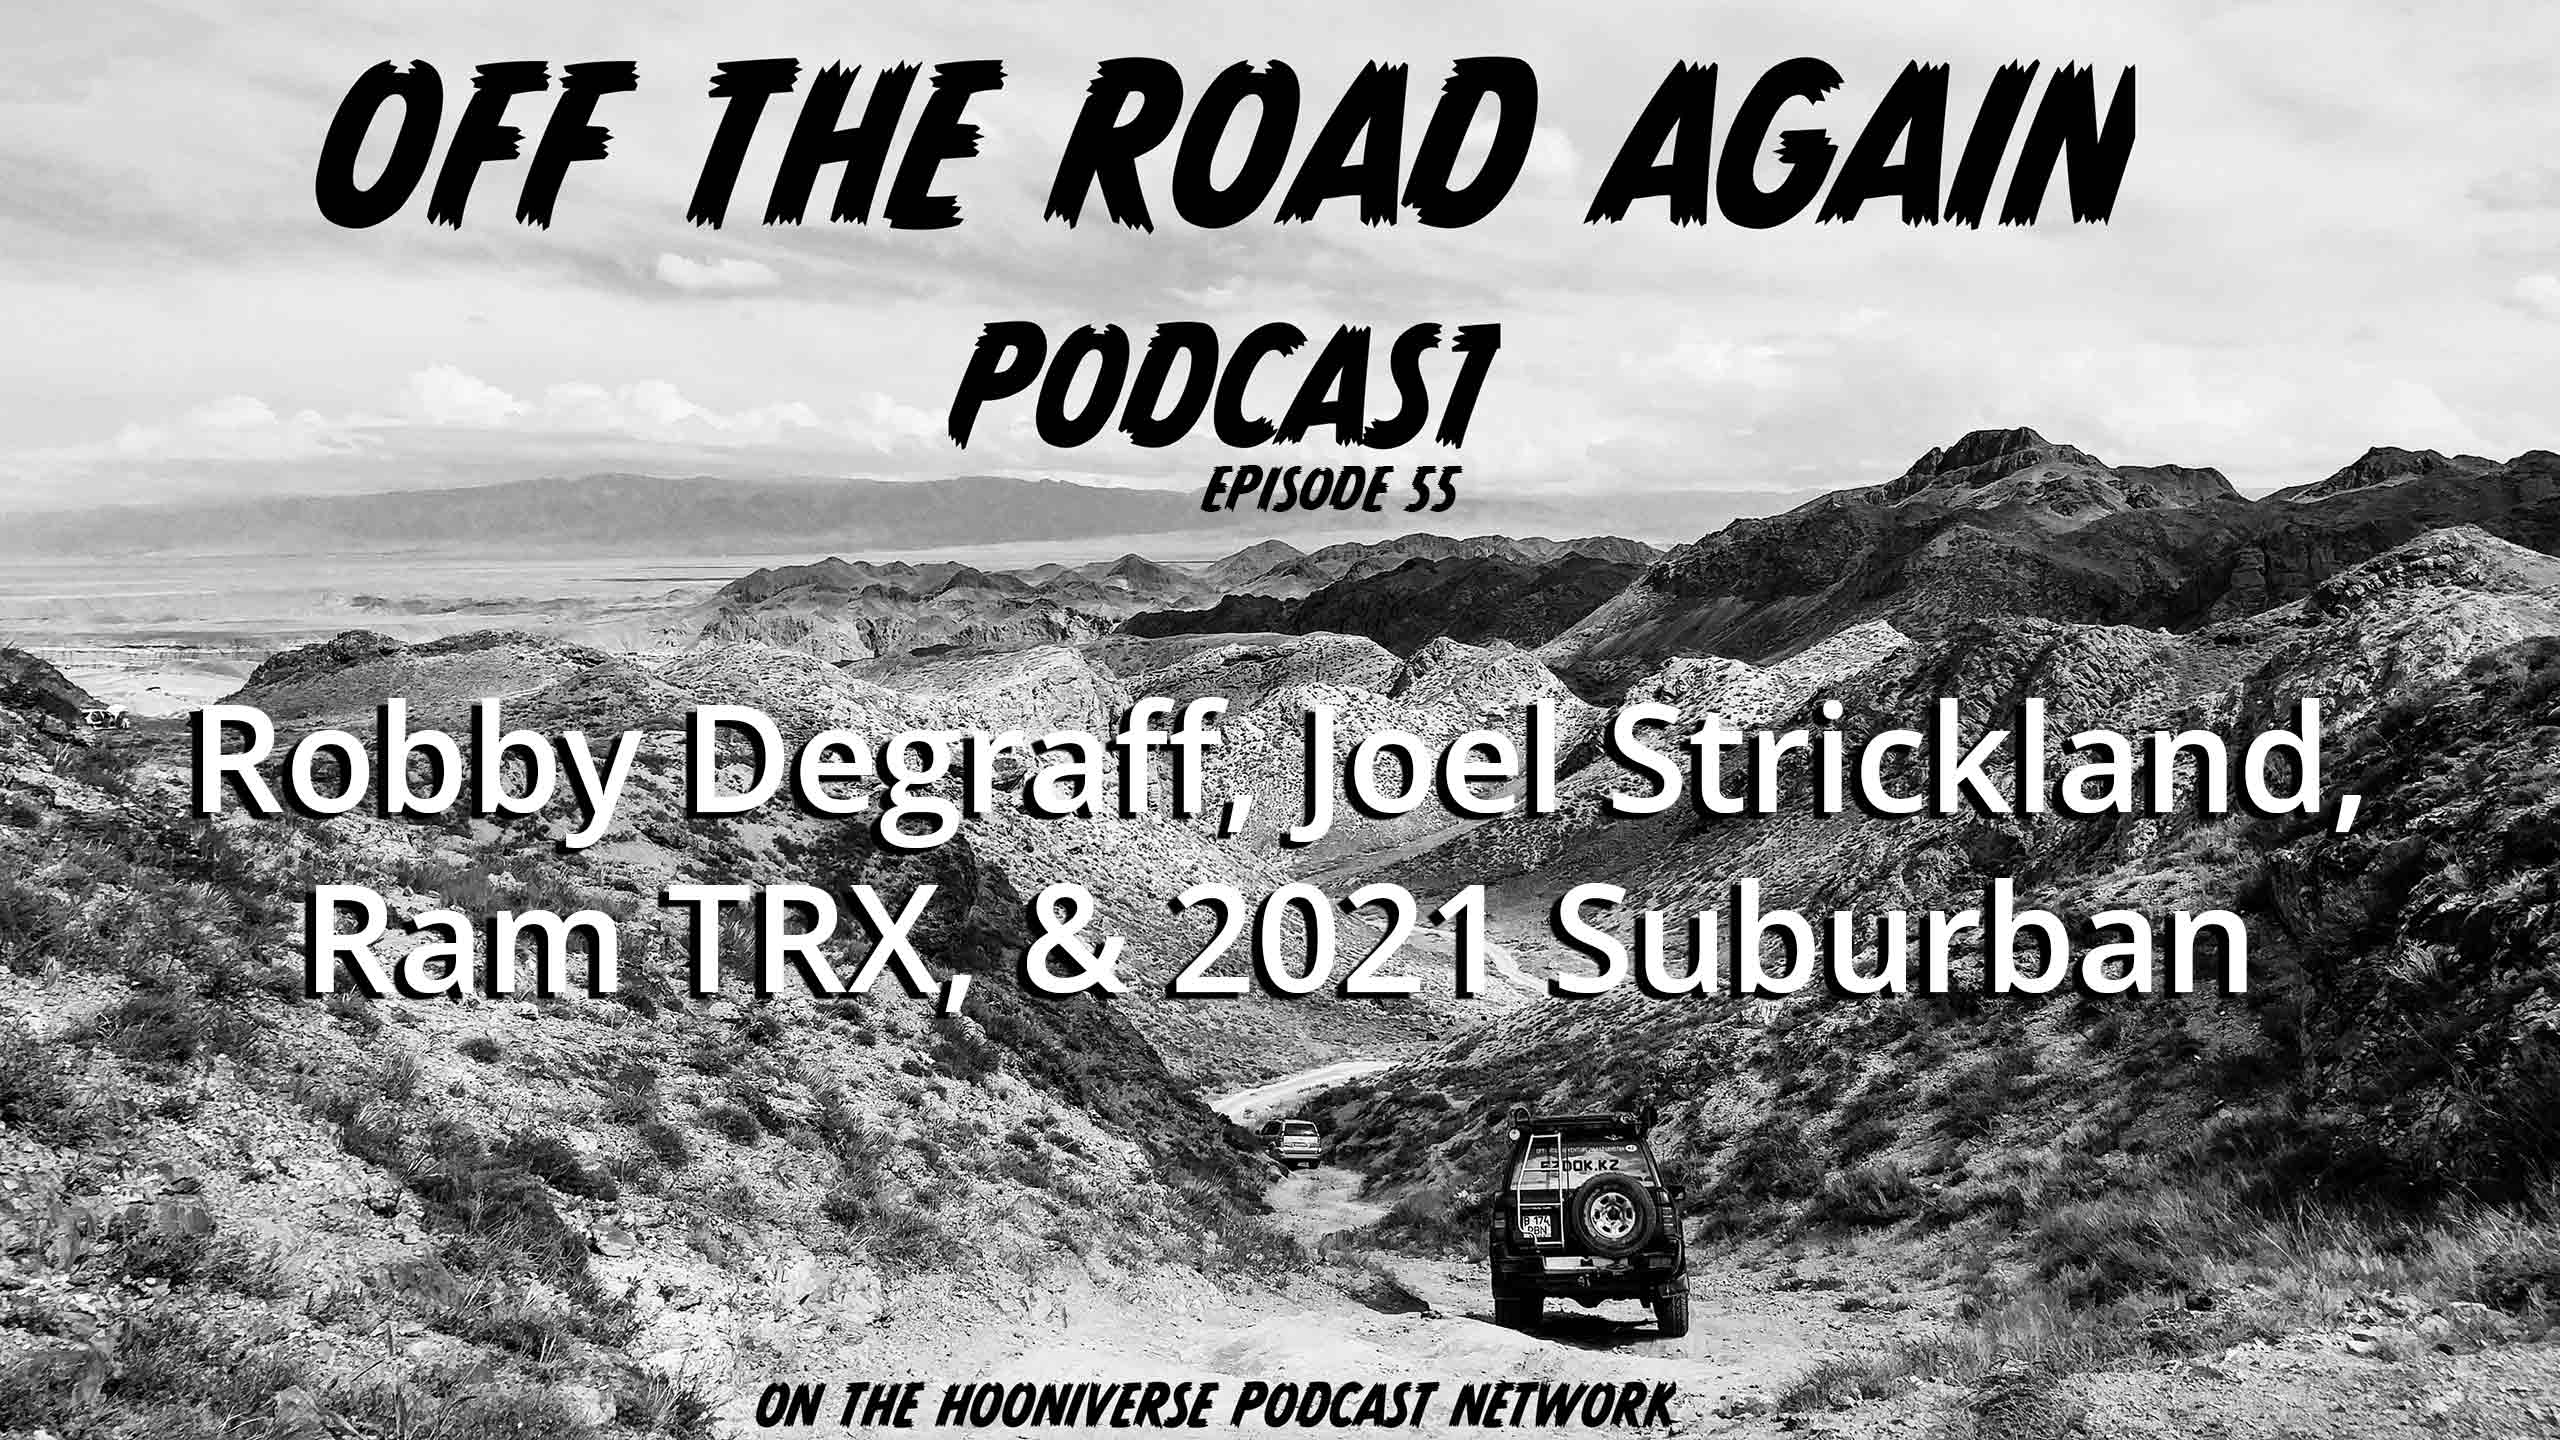 Ram-TRX-Robby-Degraff-Joel-Strickland-Off-The-Road-Again-Podcast-Episode-55